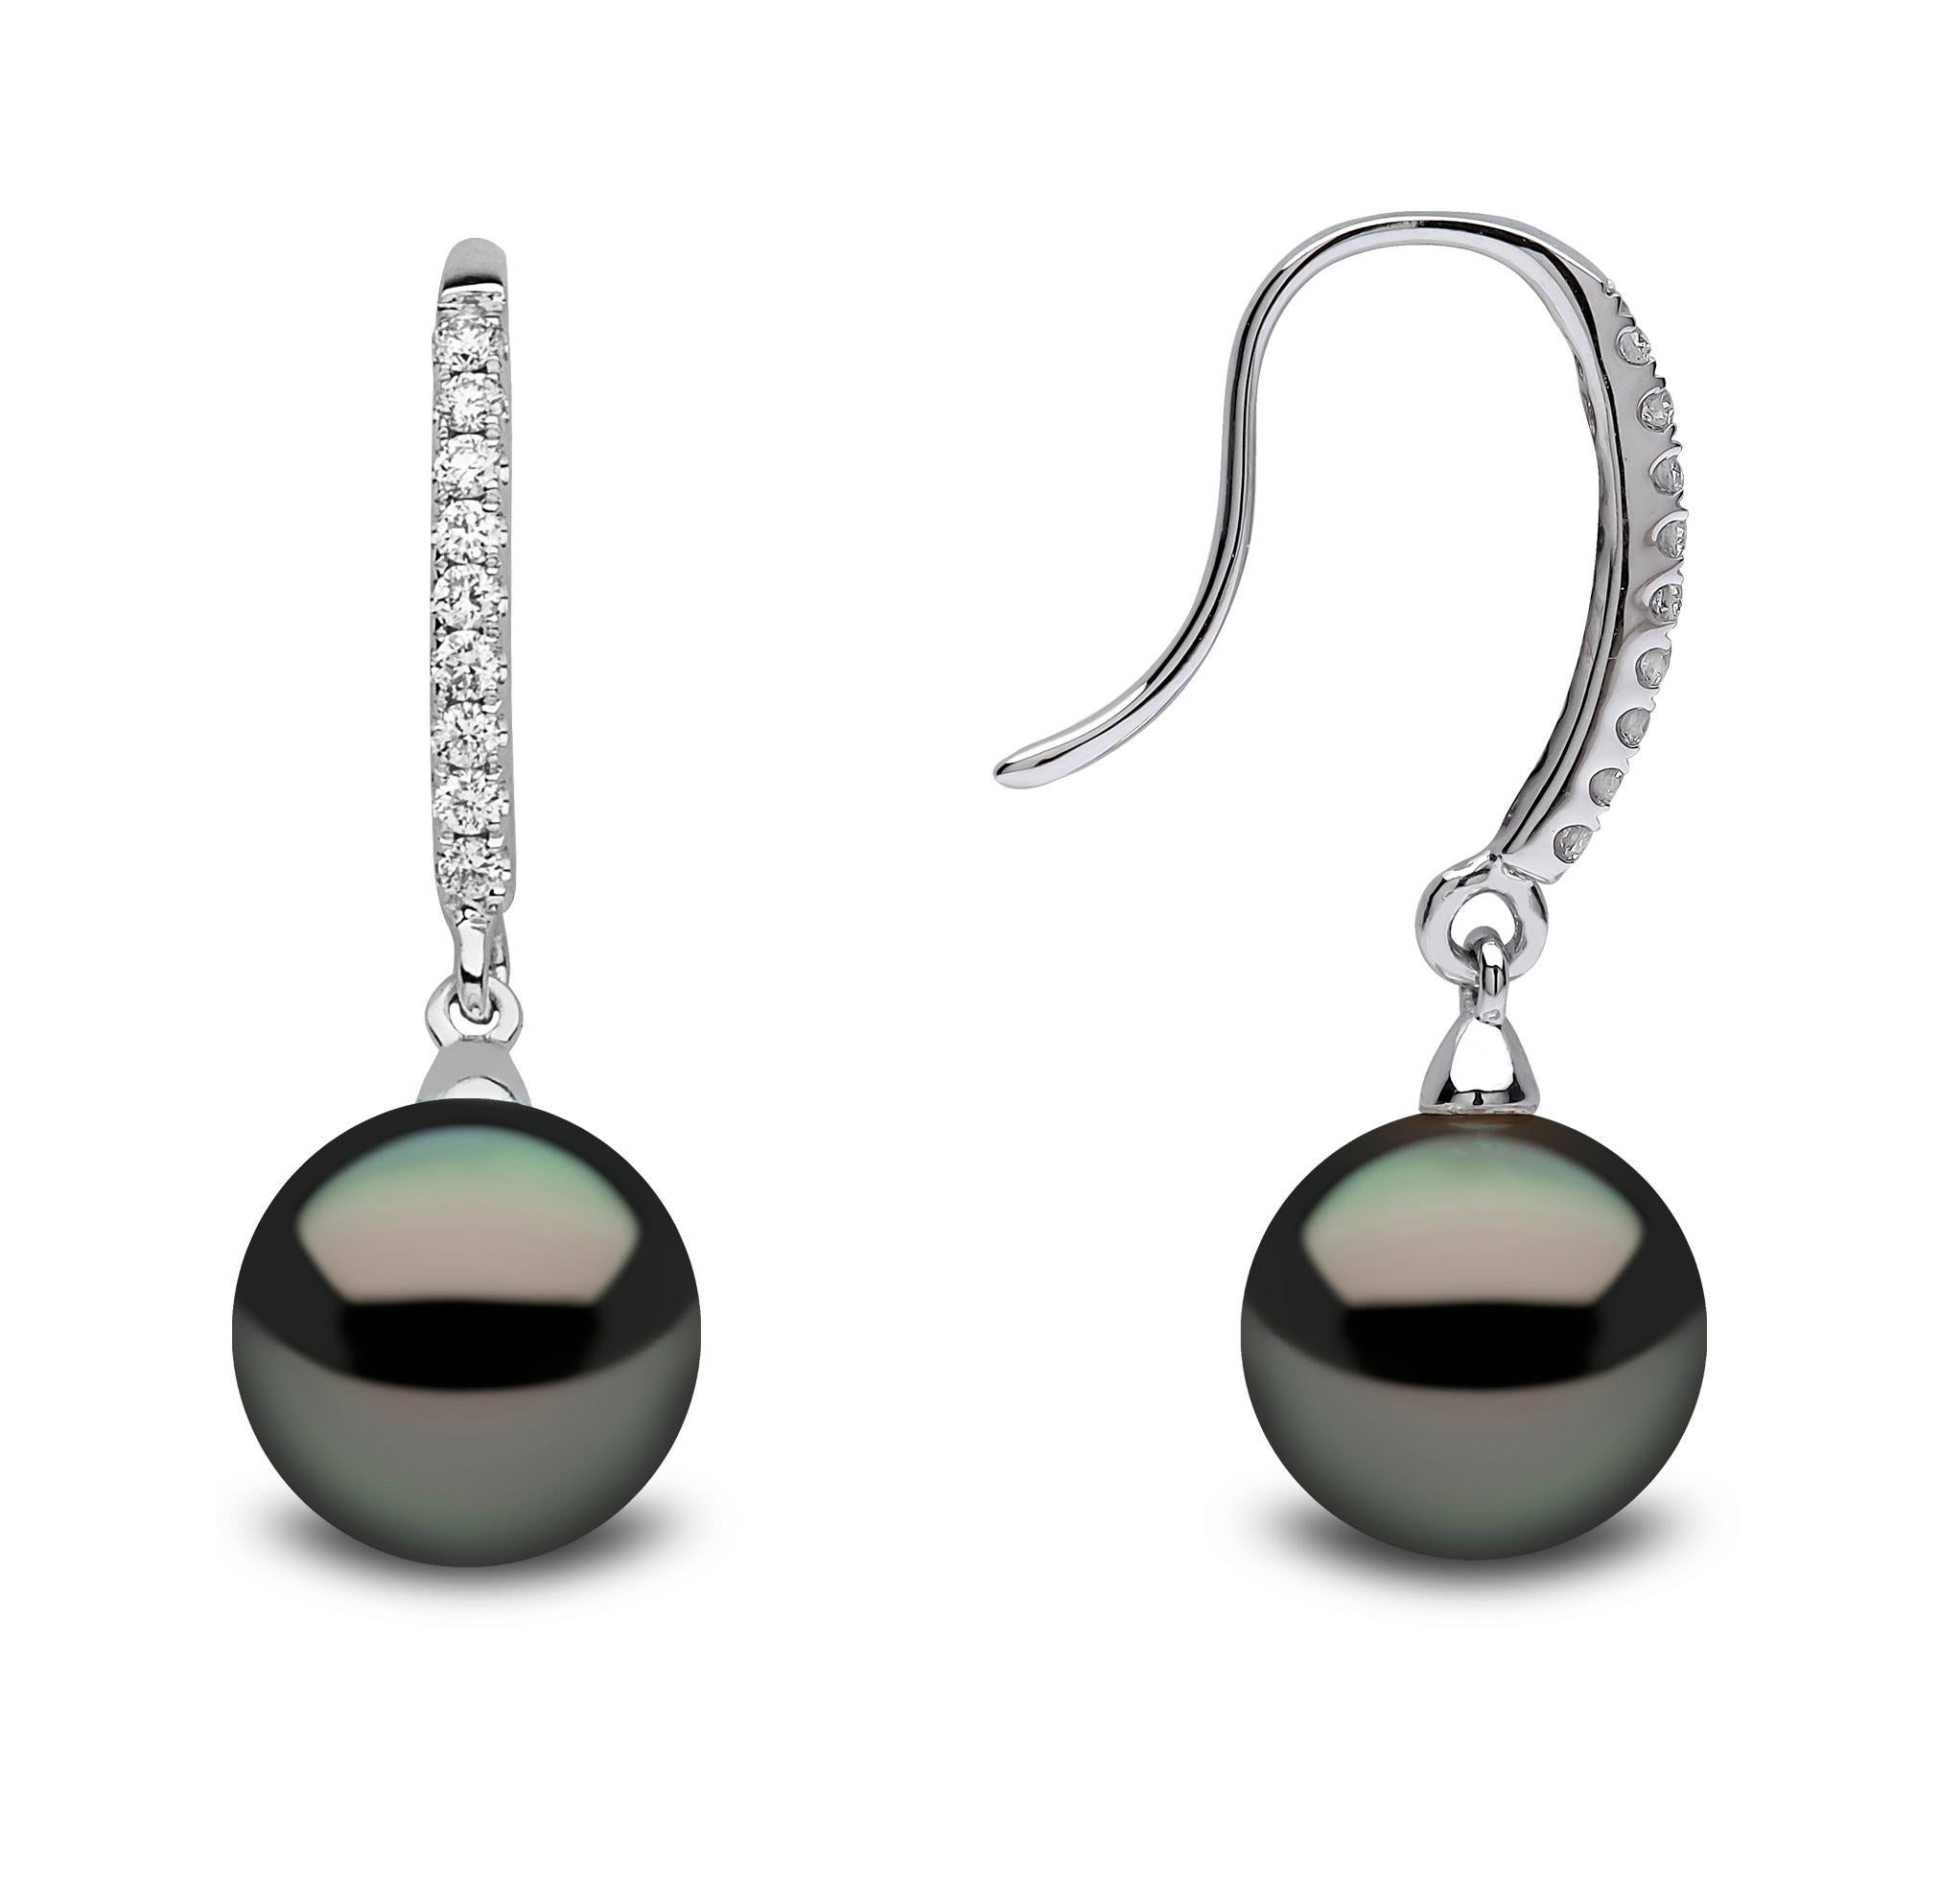 These elegant earrings by Yoko London feature lustrous, black Tahitian pearls beneath a clean line of diamonds. The classic design combined with the striking, natural colour of the Tahitian pearls makes for a unique, yet wearable design. 
-	8-8.5mm